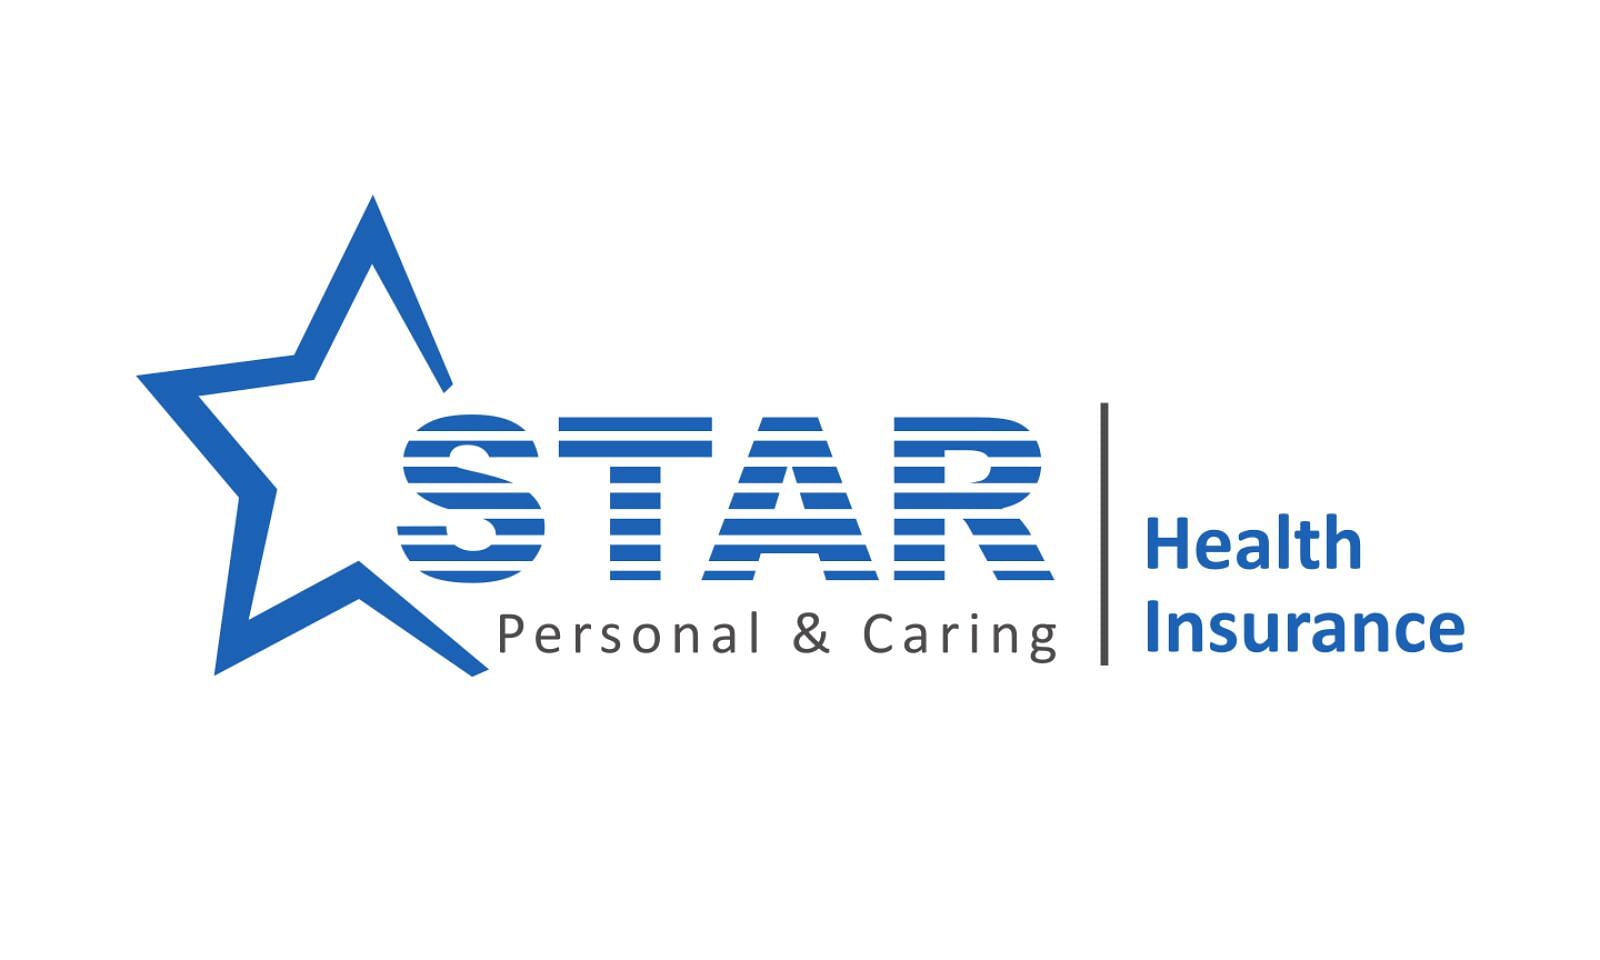 Star Health Launches WhatsApp Services to Provide Easy Policy and Claims Access To Customers decoding=